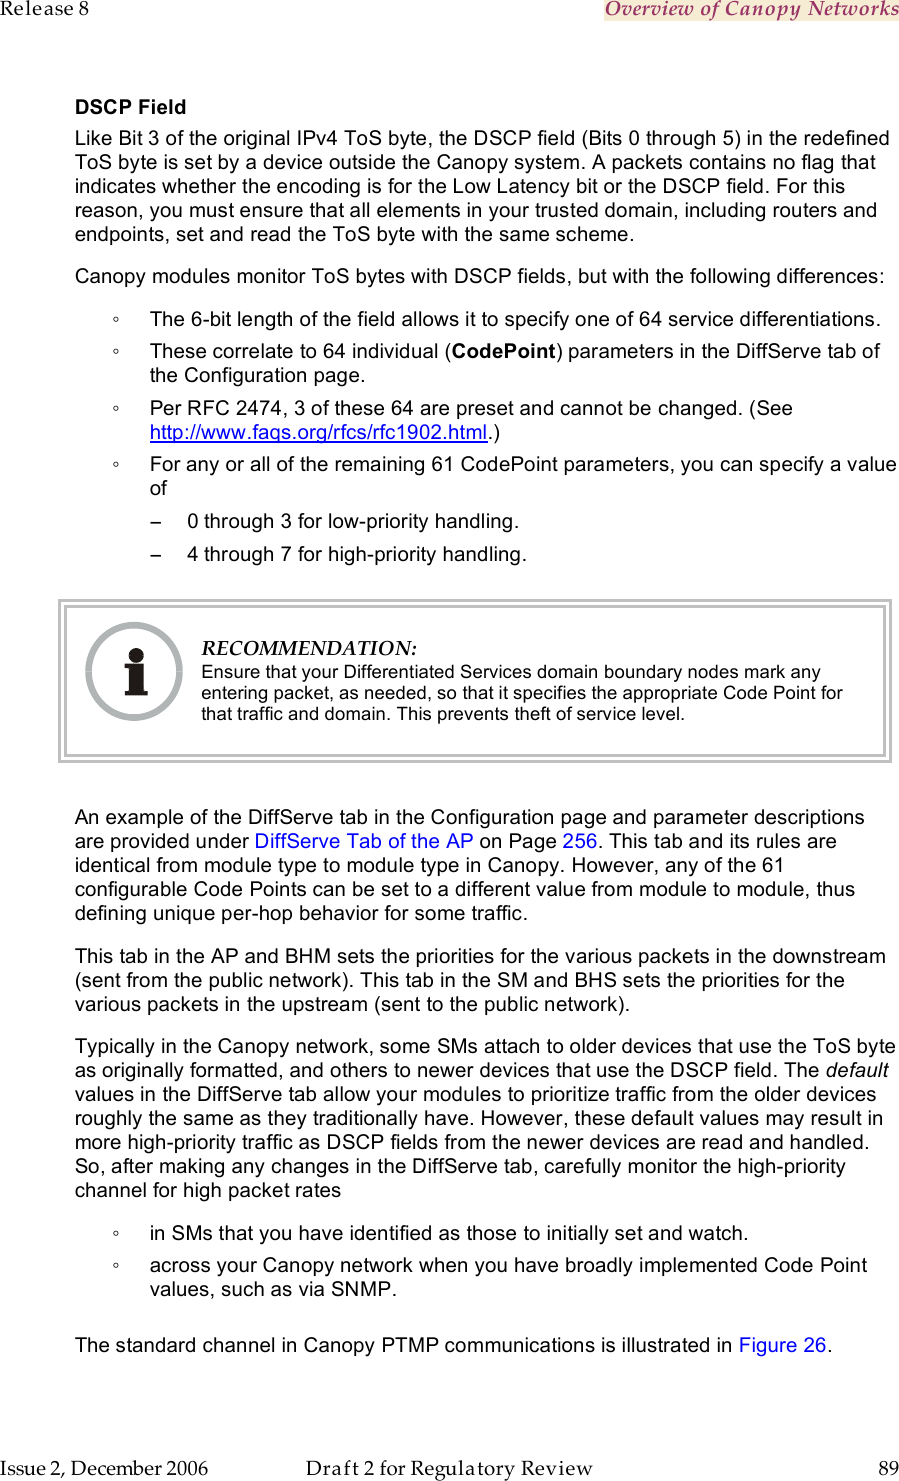 Release 8    Overview of Canopy Networks                  March 200                  Through Software Release 6.   Issue 2, December 2006  Draft 2 for Regulatory Review  89     DSCP Field Like Bit 3 of the original IPv4 ToS byte, the DSCP field (Bits 0 through 5) in the redefined ToS byte is set by a device outside the Canopy system. A packets contains no flag that indicates whether the encoding is for the Low Latency bit or the DSCP field. For this reason, you must ensure that all elements in your trusted domain, including routers and endpoints, set and read the ToS byte with the same scheme.  Canopy modules monitor ToS bytes with DSCP fields, but with the following differences: ◦  The 6-bit length of the field allows it to specify one of 64 service differentiations. ◦  These correlate to 64 individual (CodePoint) parameters in the DiffServe tab of the Configuration page. ◦  Per RFC 2474, 3 of these 64 are preset and cannot be changed. (See http://www.faqs.org/rfcs/rfc1902.html.) ◦  For any or all of the remaining 61 CodePoint parameters, you can specify a value of  −  0 through 3 for low-priority handling. −  4 through 7 for high-priority handling.   RECOMMENDATION: Ensure that your Differentiated Services domain boundary nodes mark any entering packet, as needed, so that it specifies the appropriate Code Point for that traffic and domain. This prevents theft of service level.  An example of the DiffServe tab in the Configuration page and parameter descriptions are provided under DiffServe Tab of the AP on Page 256. This tab and its rules are identical from module type to module type in Canopy. However, any of the 61 configurable Code Points can be set to a different value from module to module, thus defining unique per-hop behavior for some traffic. This tab in the AP and BHM sets the priorities for the various packets in the downstream (sent from the public network). This tab in the SM and BHS sets the priorities for the various packets in the upstream (sent to the public network).  Typically in the Canopy network, some SMs attach to older devices that use the ToS byte as originally formatted, and others to newer devices that use the DSCP field. The default values in the DiffServe tab allow your modules to prioritize traffic from the older devices roughly the same as they traditionally have. However, these default values may result in more high-priority traffic as DSCP fields from the newer devices are read and handled. So, after making any changes in the DiffServe tab, carefully monitor the high-priority channel for high packet rates  ◦  in SMs that you have identified as those to initially set and watch. ◦  across your Canopy network when you have broadly implemented Code Point values, such as via SNMP.   The standard channel in Canopy PTMP communications is illustrated in Figure 26. 